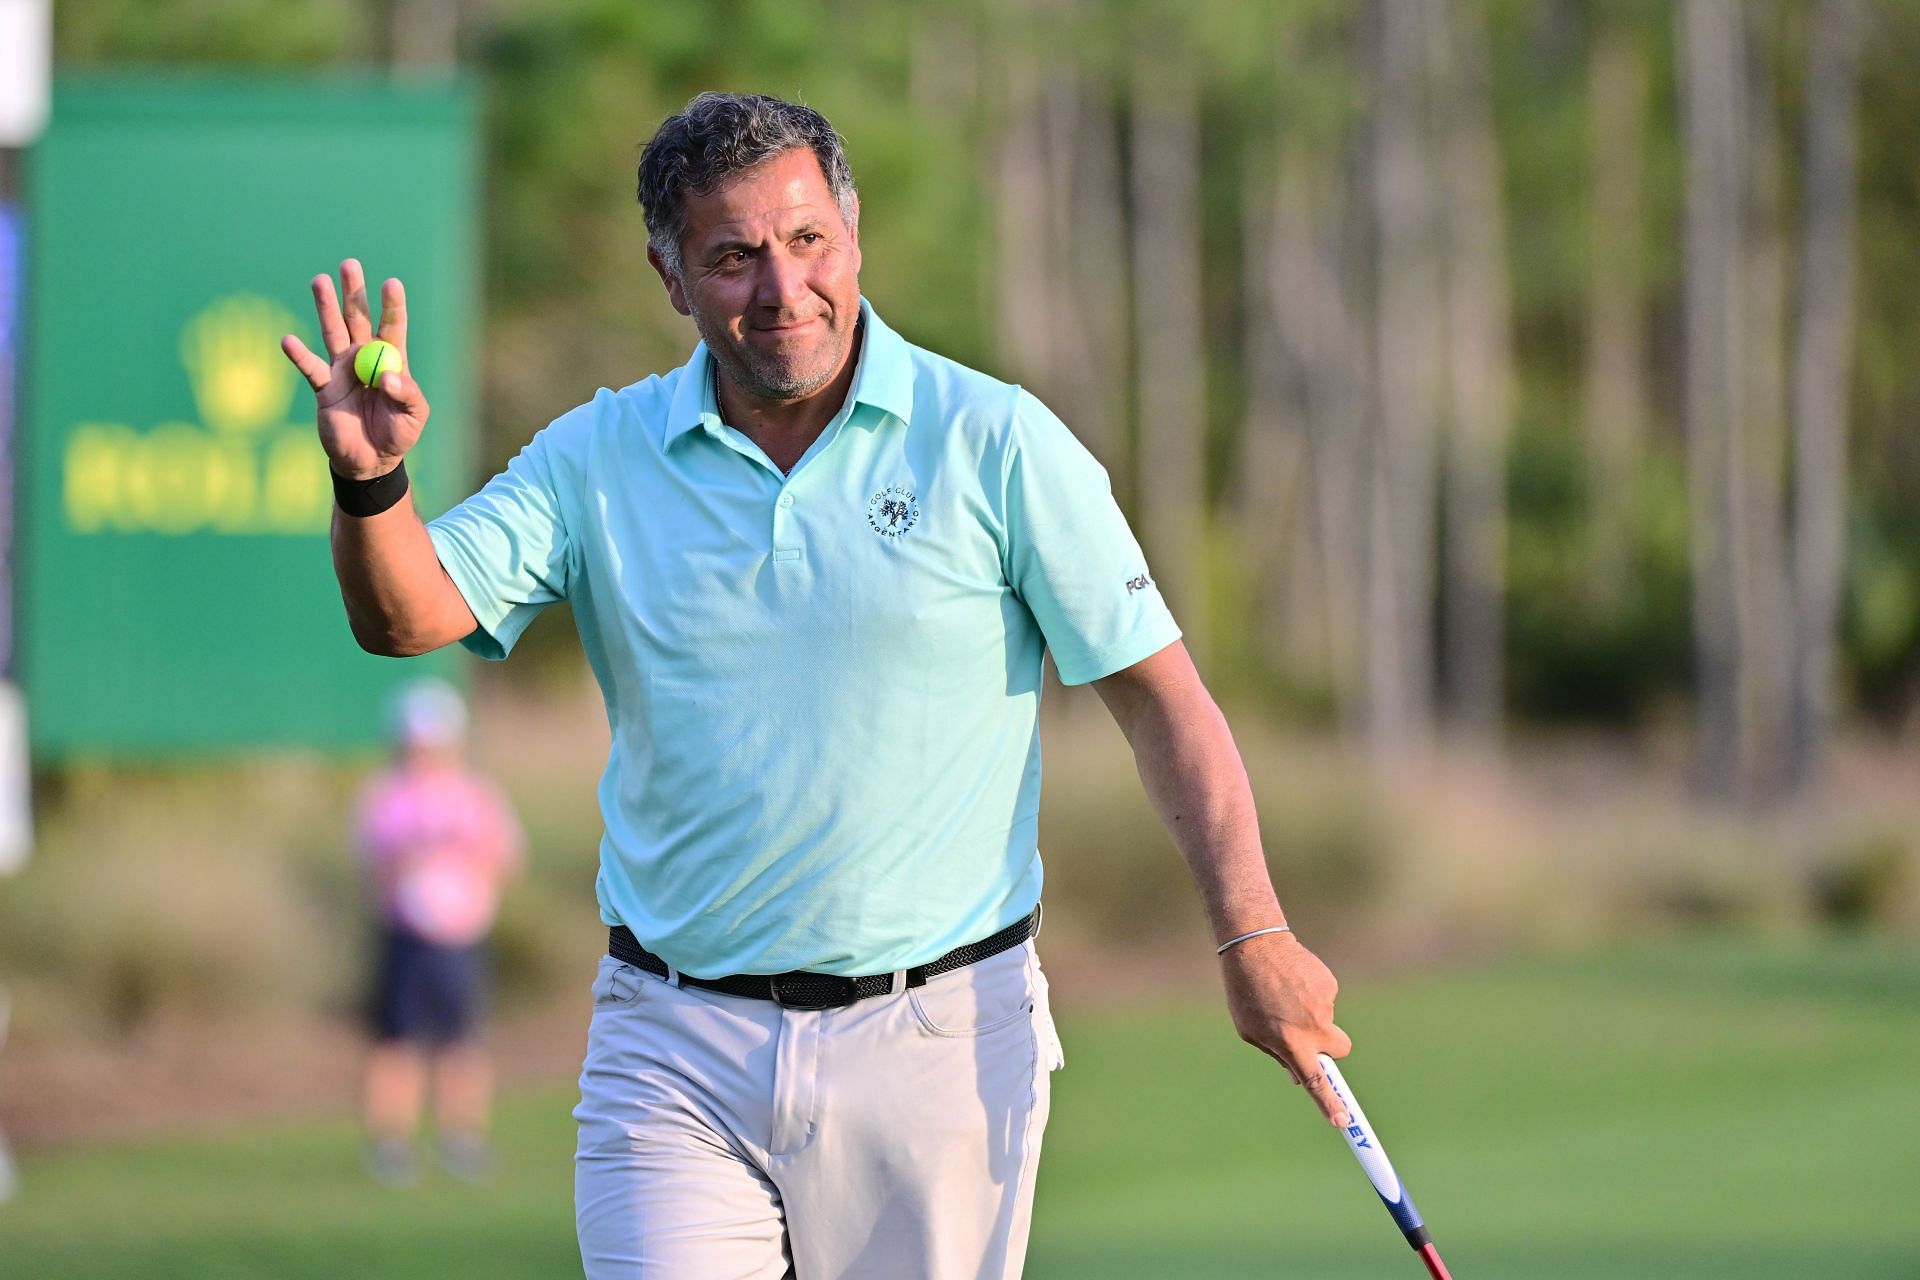 2022 PGA Championship final results: Prize money payout, leaderboard and  how much each golfer won